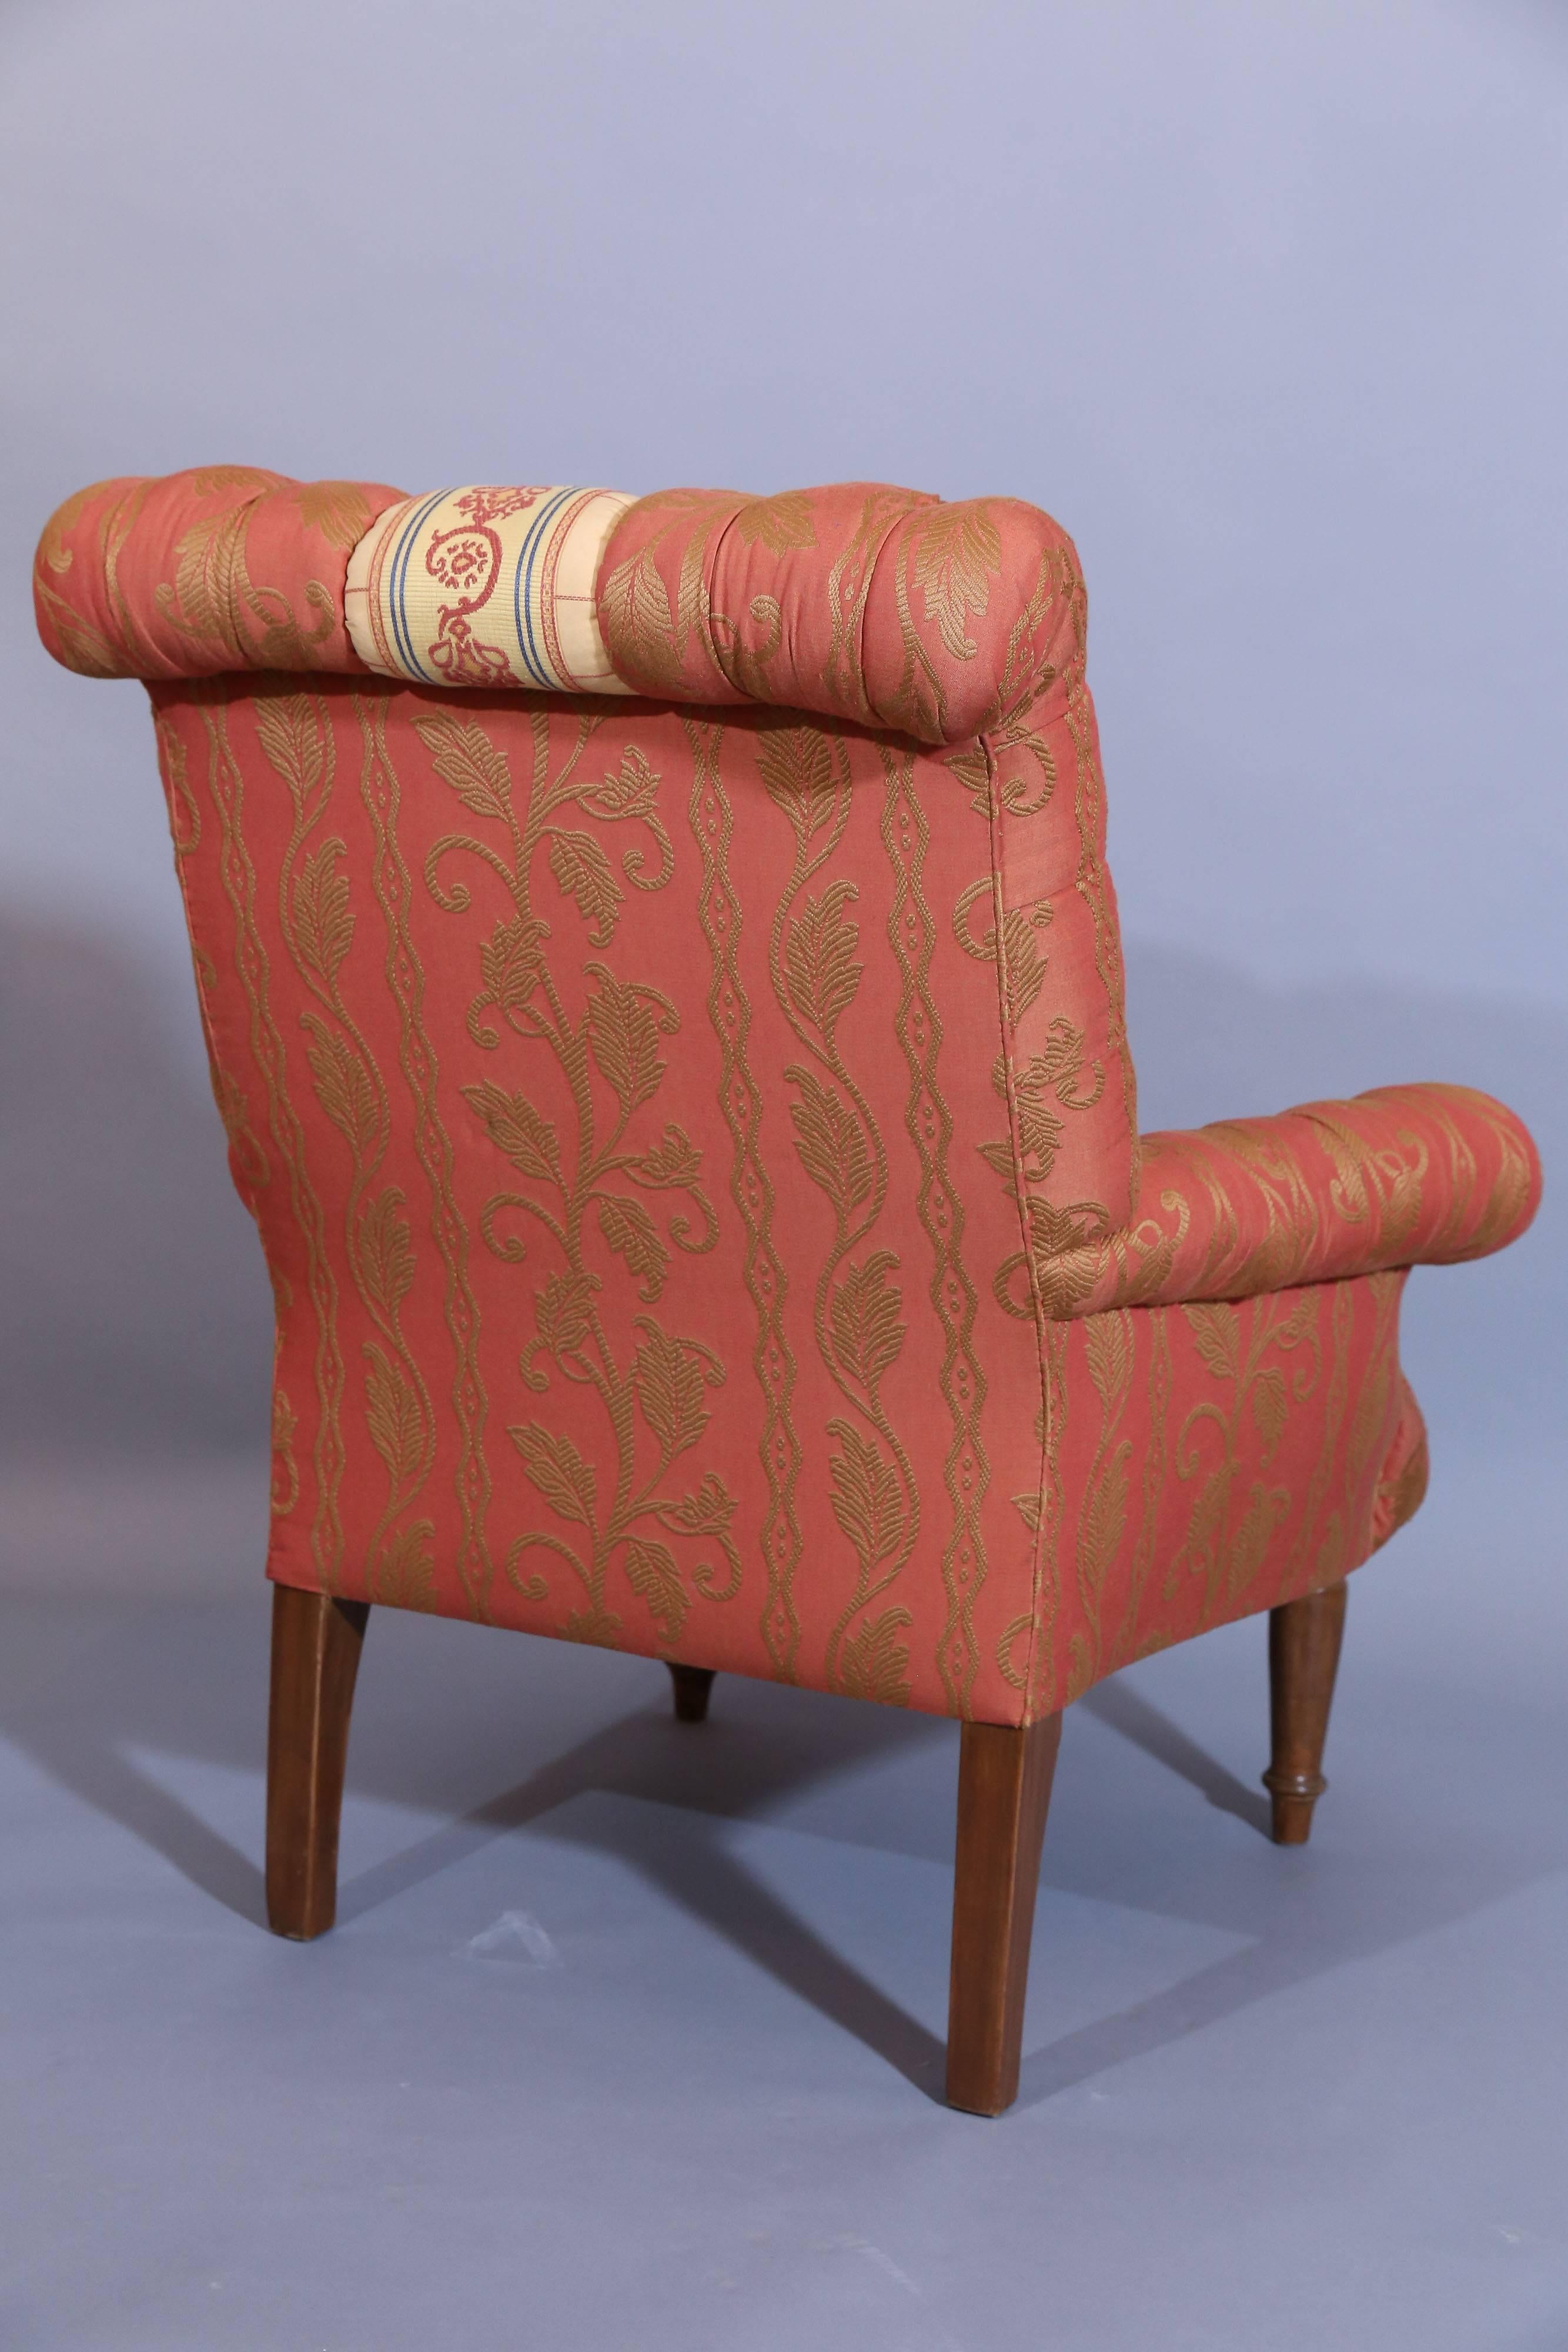 Tufted Napoleon III style club chair was designed by Bunny Williams for a 
personal client.

Contrasting band runs down the front of chair, which adds an elegant touch.

Extremely comfortable.
 